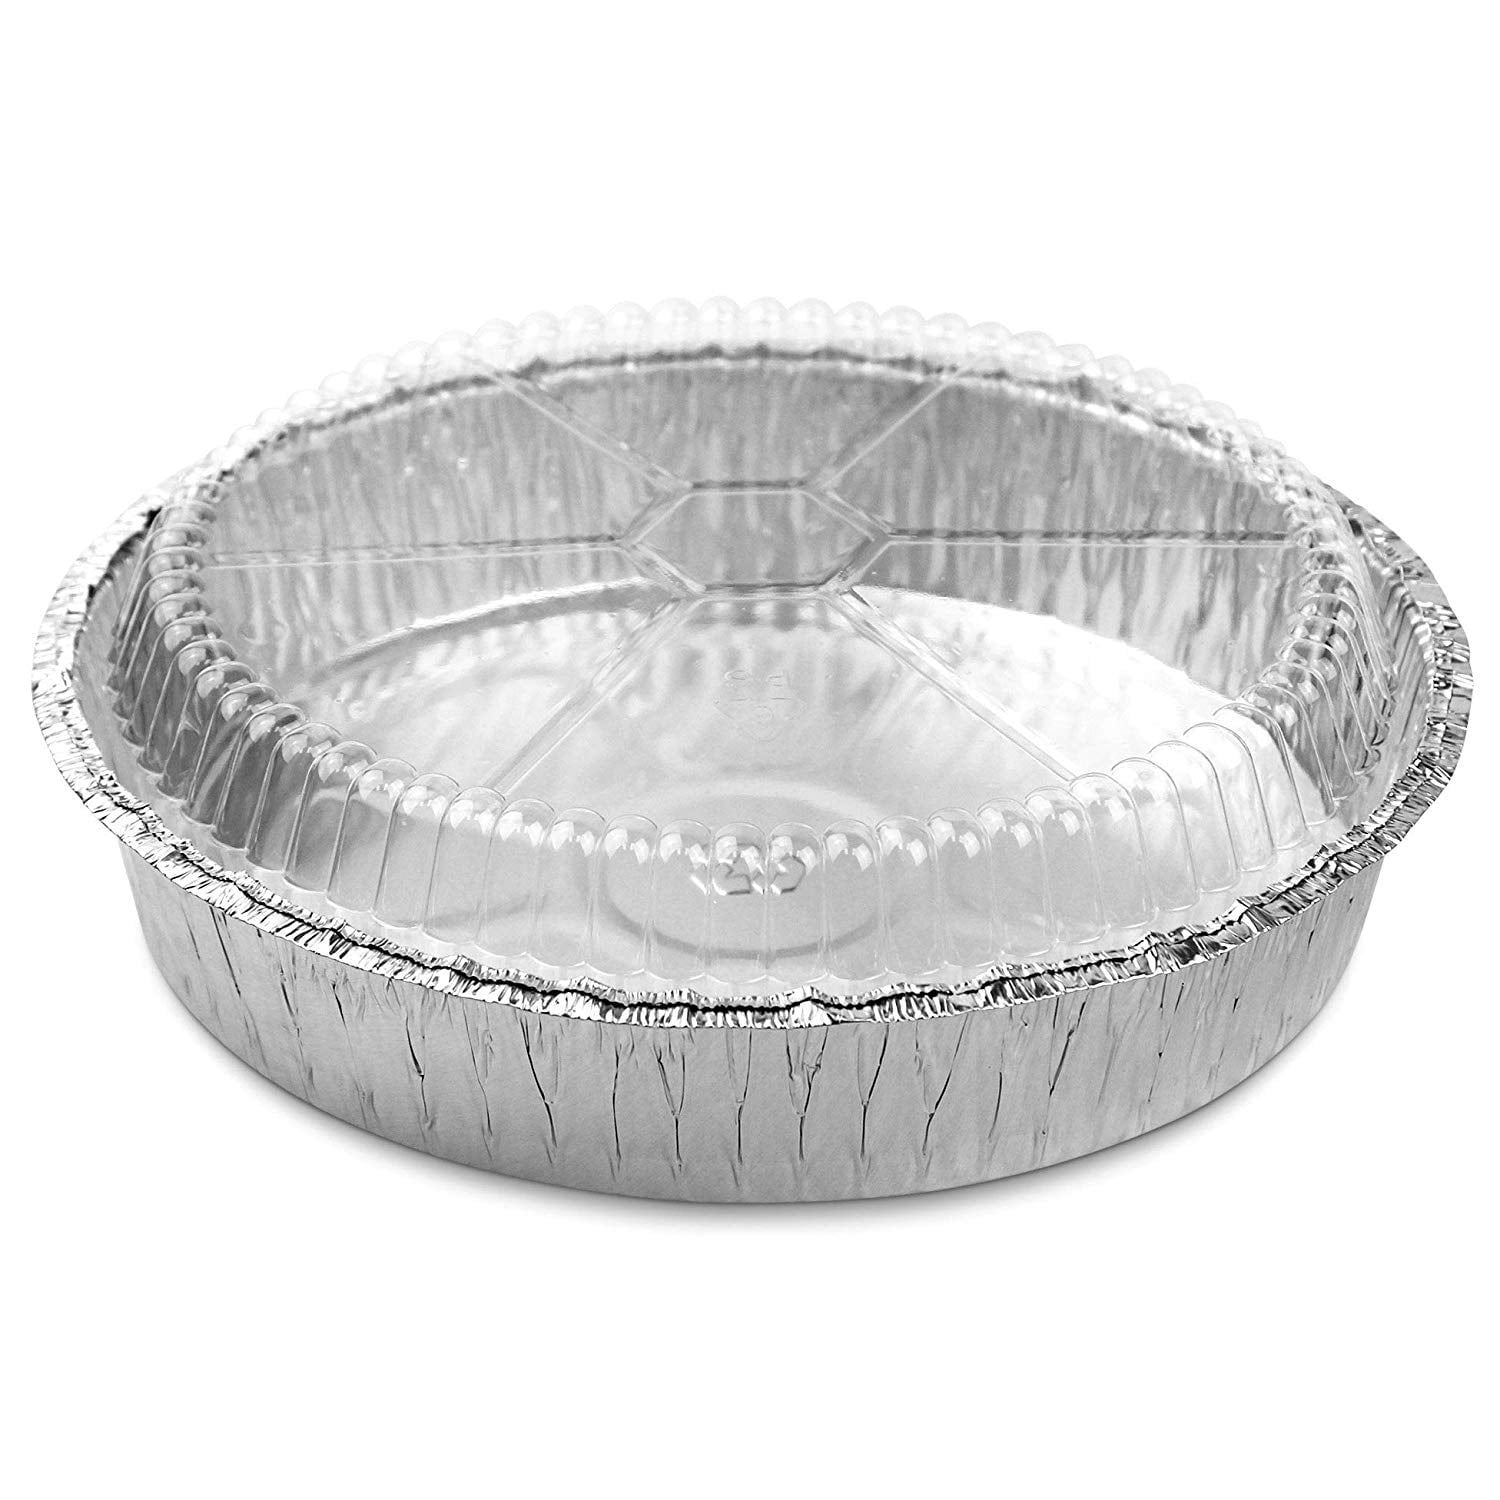 Details about   Stock Your Home Aluminum Pans with Clear Plastic Lids 50 Pack 